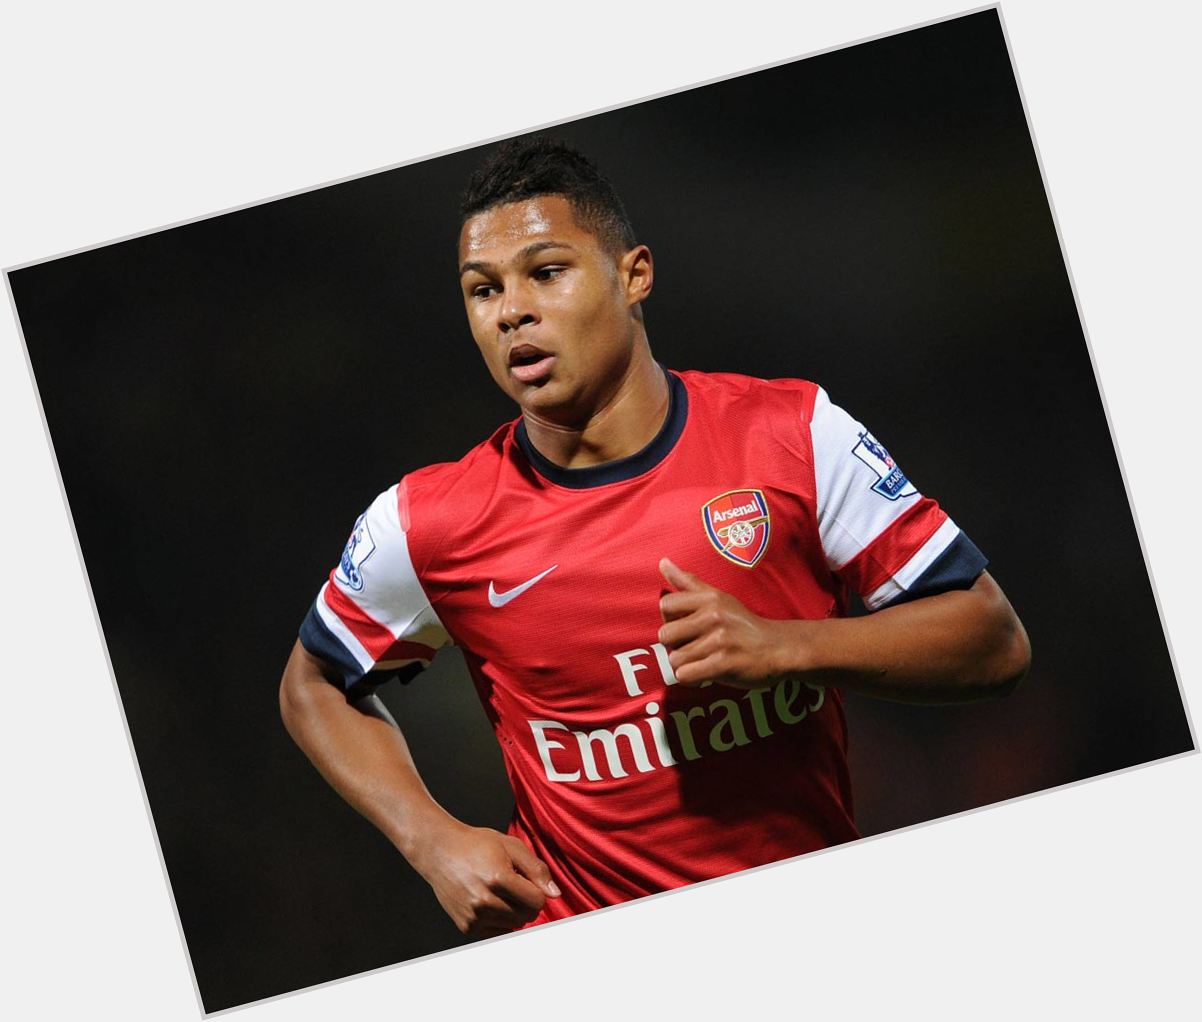 Happy Birthday Serge Gnabry

The one Arsenal let get away 